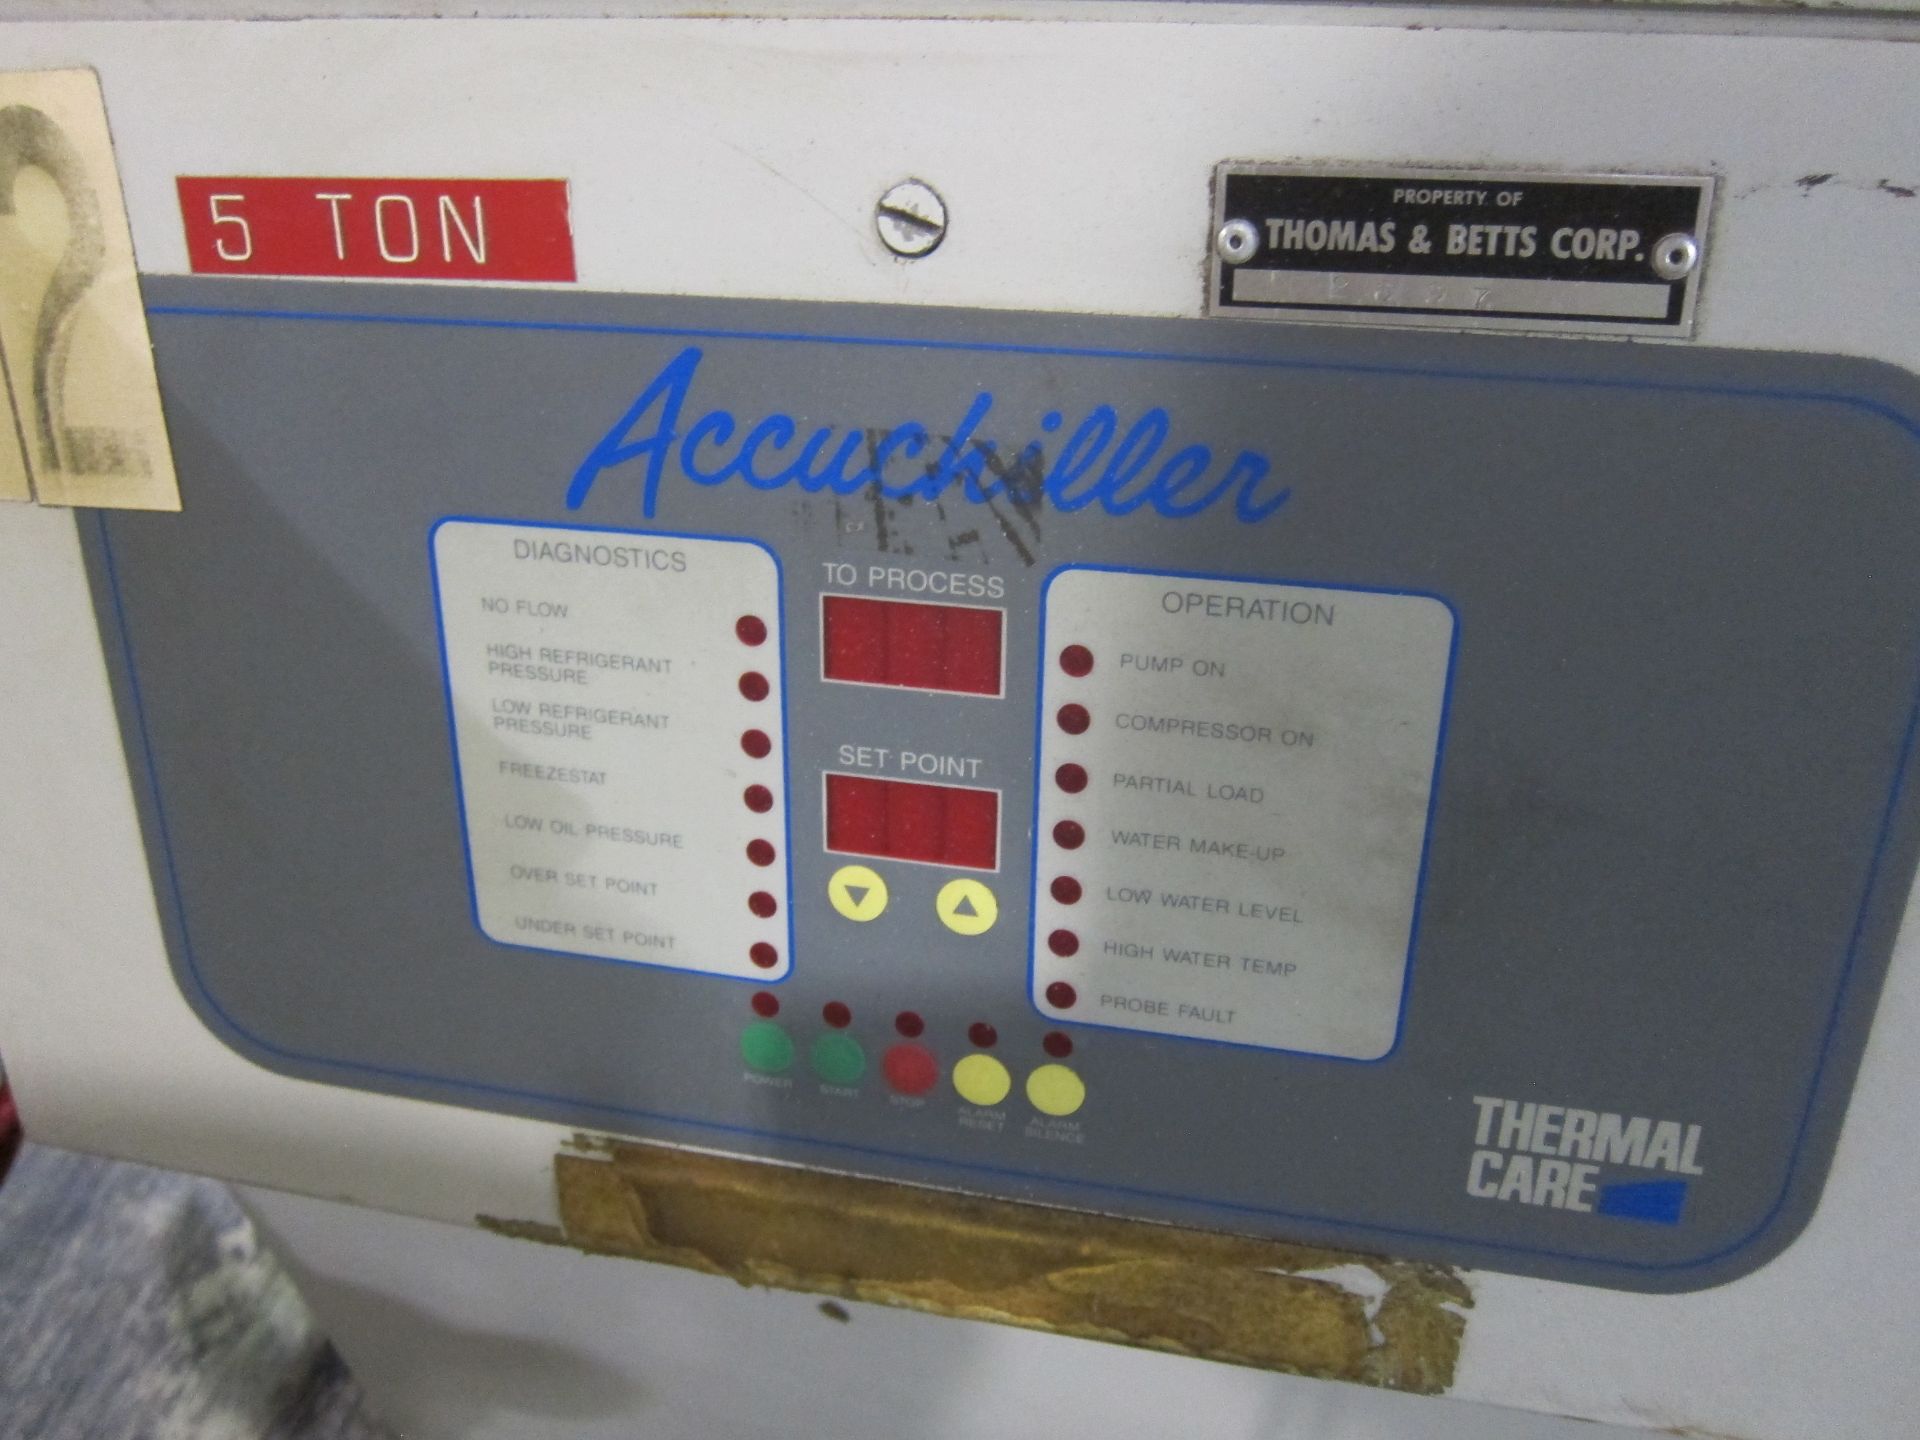 5 TON THERMAL CARE CORP ACCU-CHILLER S/N 2697 - Image 3 of 3